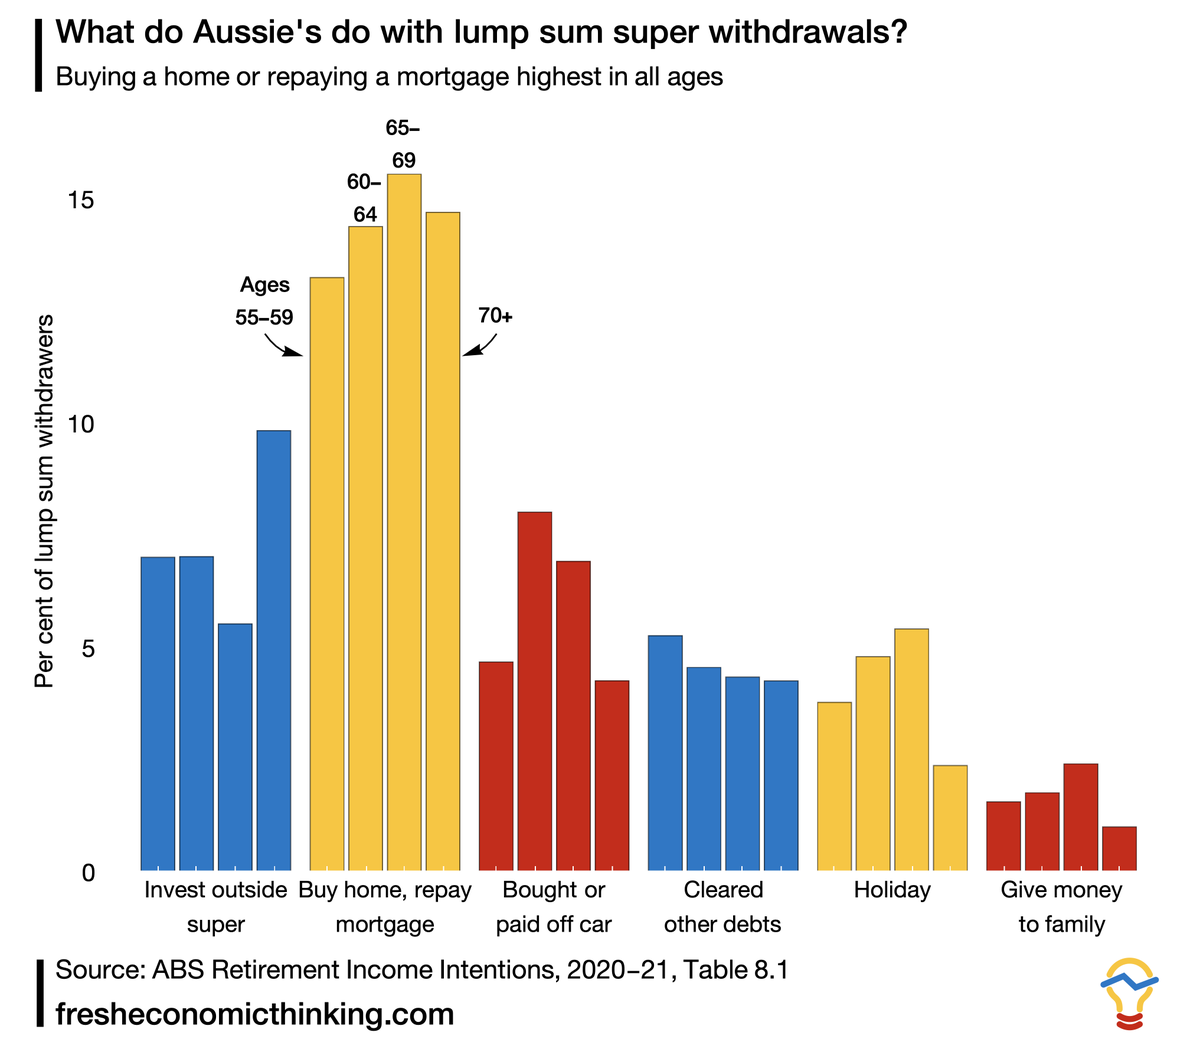 What do Aussies mostly do when they take a lump sum withdrawal from super? They buy homes and repay mortgages.